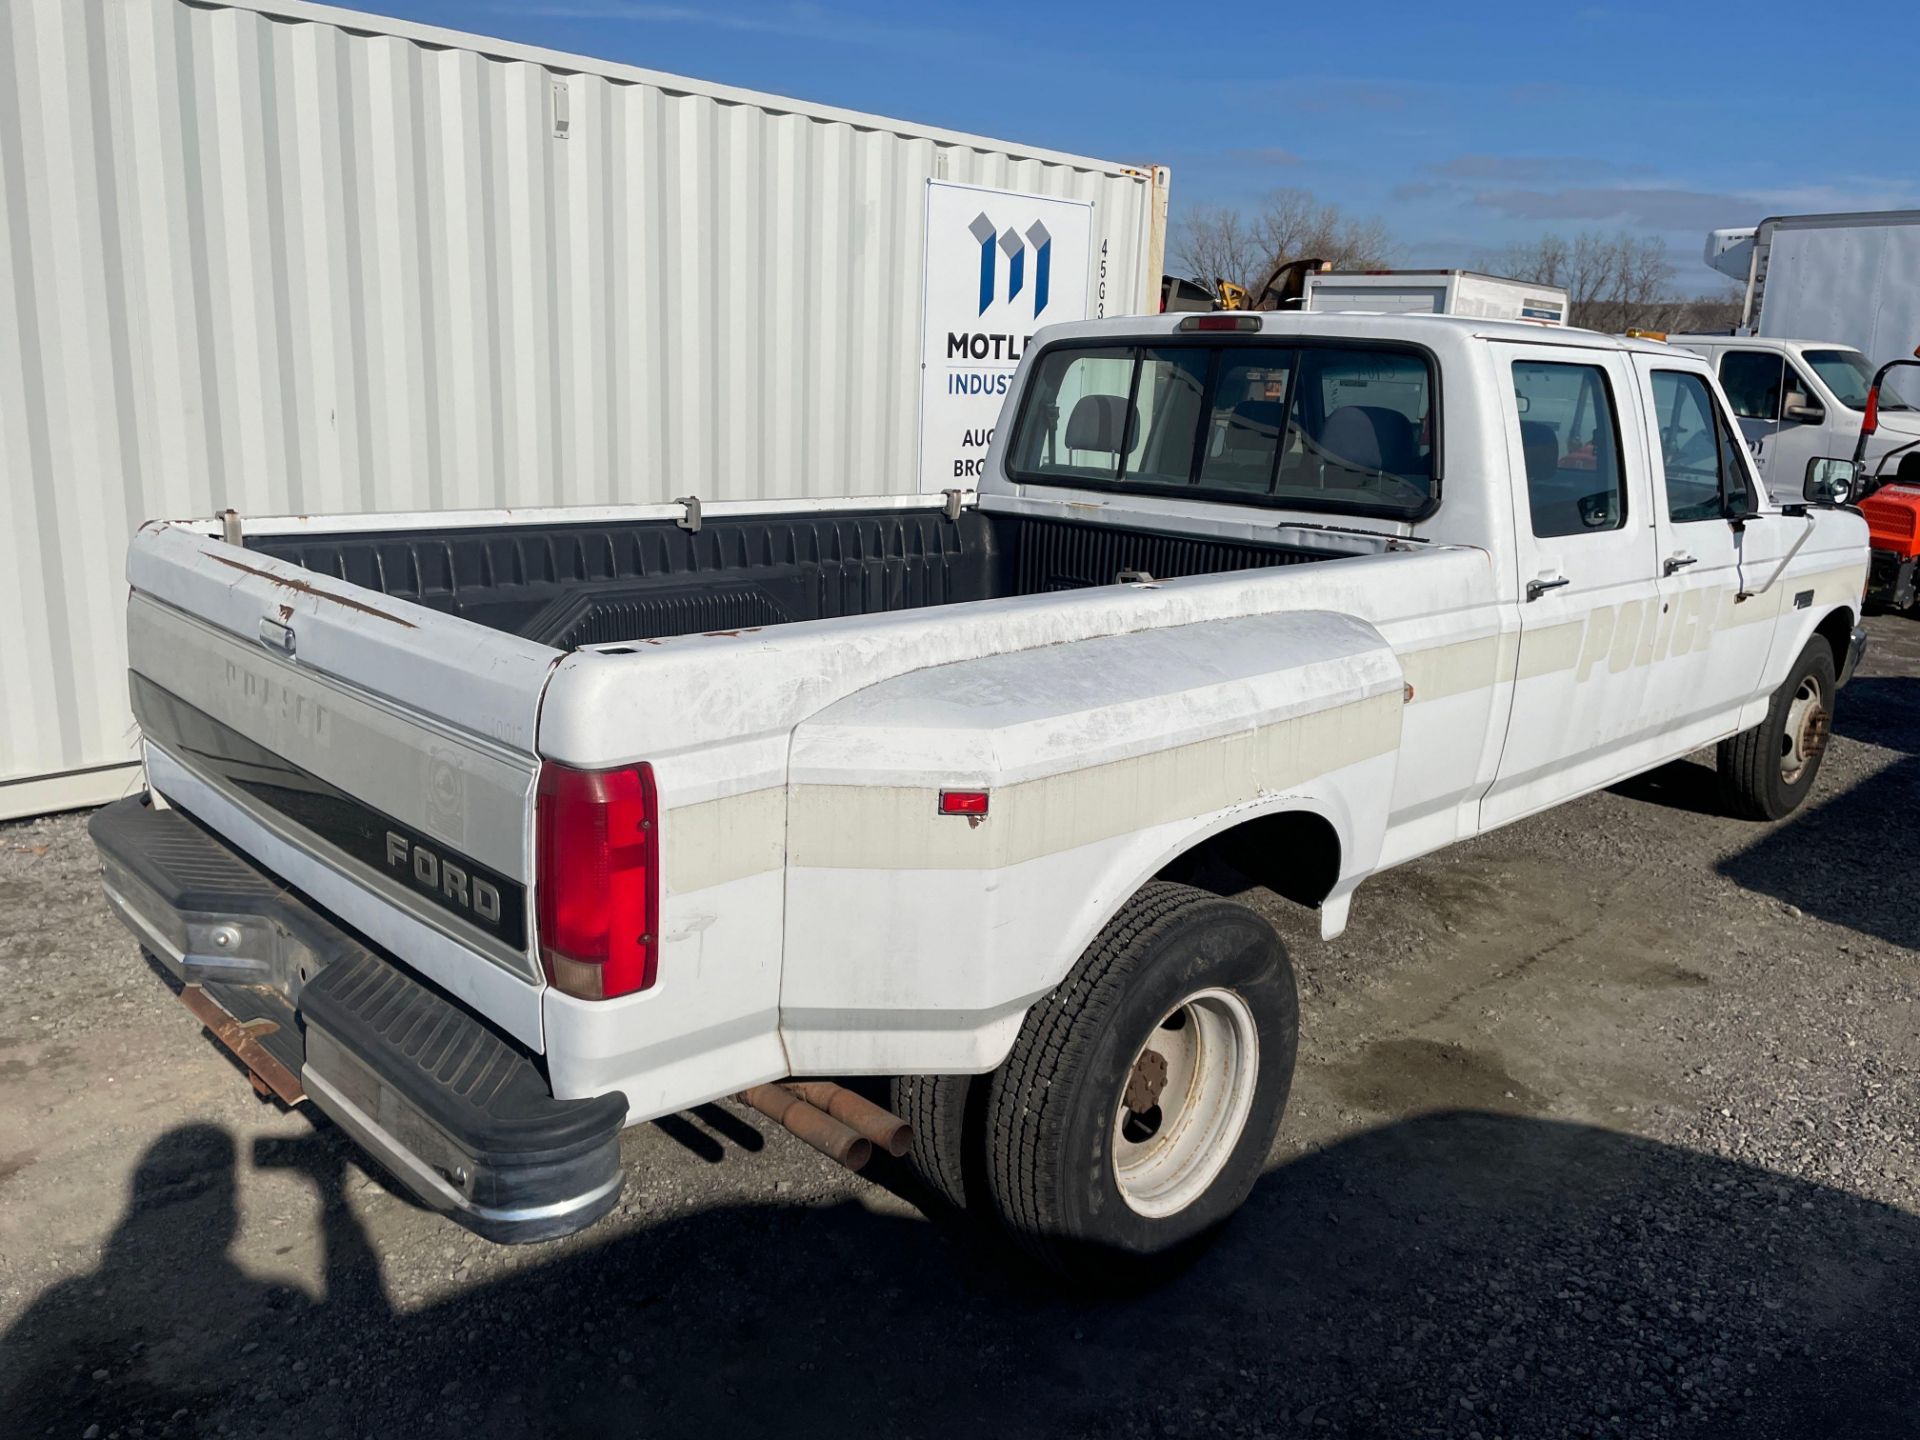 1994 Ford F350 XLT Crew Cab Dually Pickup Truck - Image 2 of 19